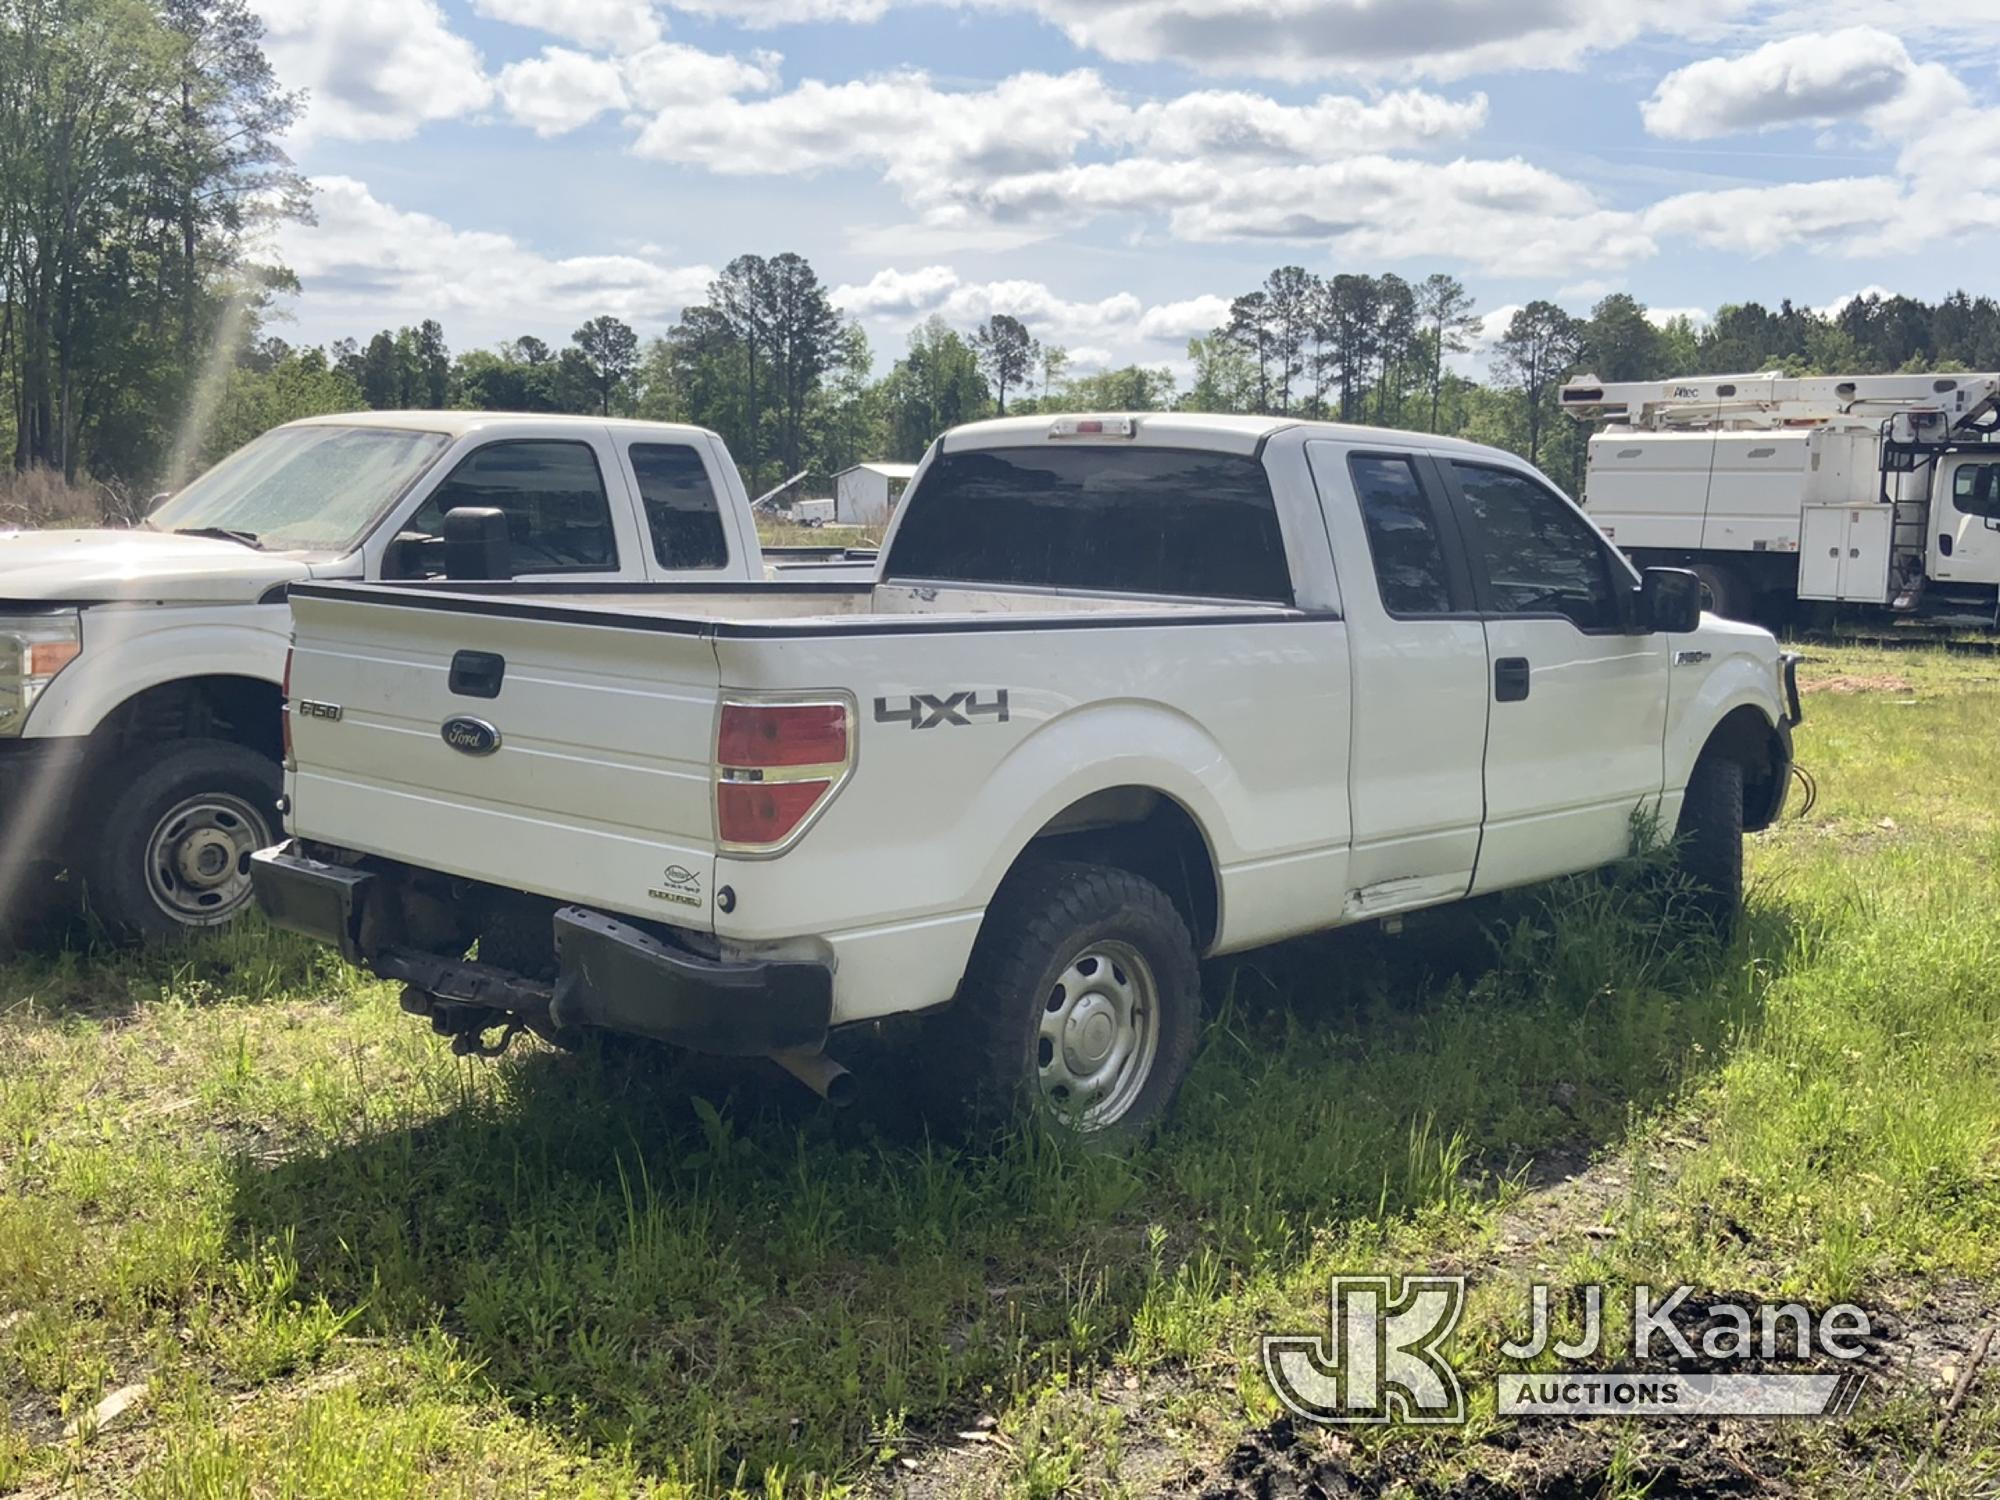 (Ridgeland, SC) 2014 Ford F150 4x4 Extended-Cab Pickup Truck Runs Rough, Does Not Move, Will Not Sta